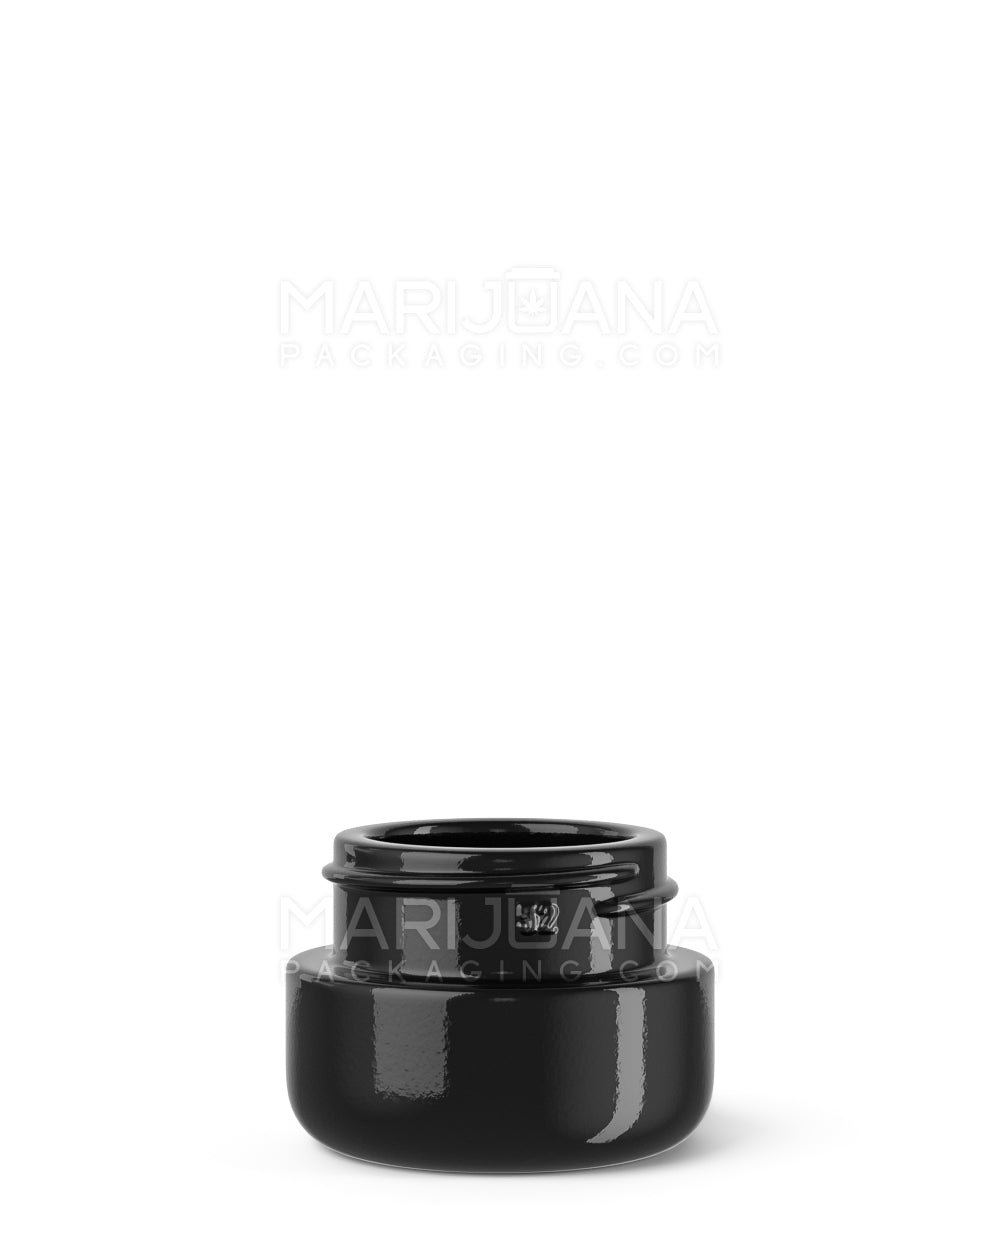 POLLEN GEAR | HiLine Glossy Black Glass Concentrate Containers | 28mm - 5mL - 308 Count